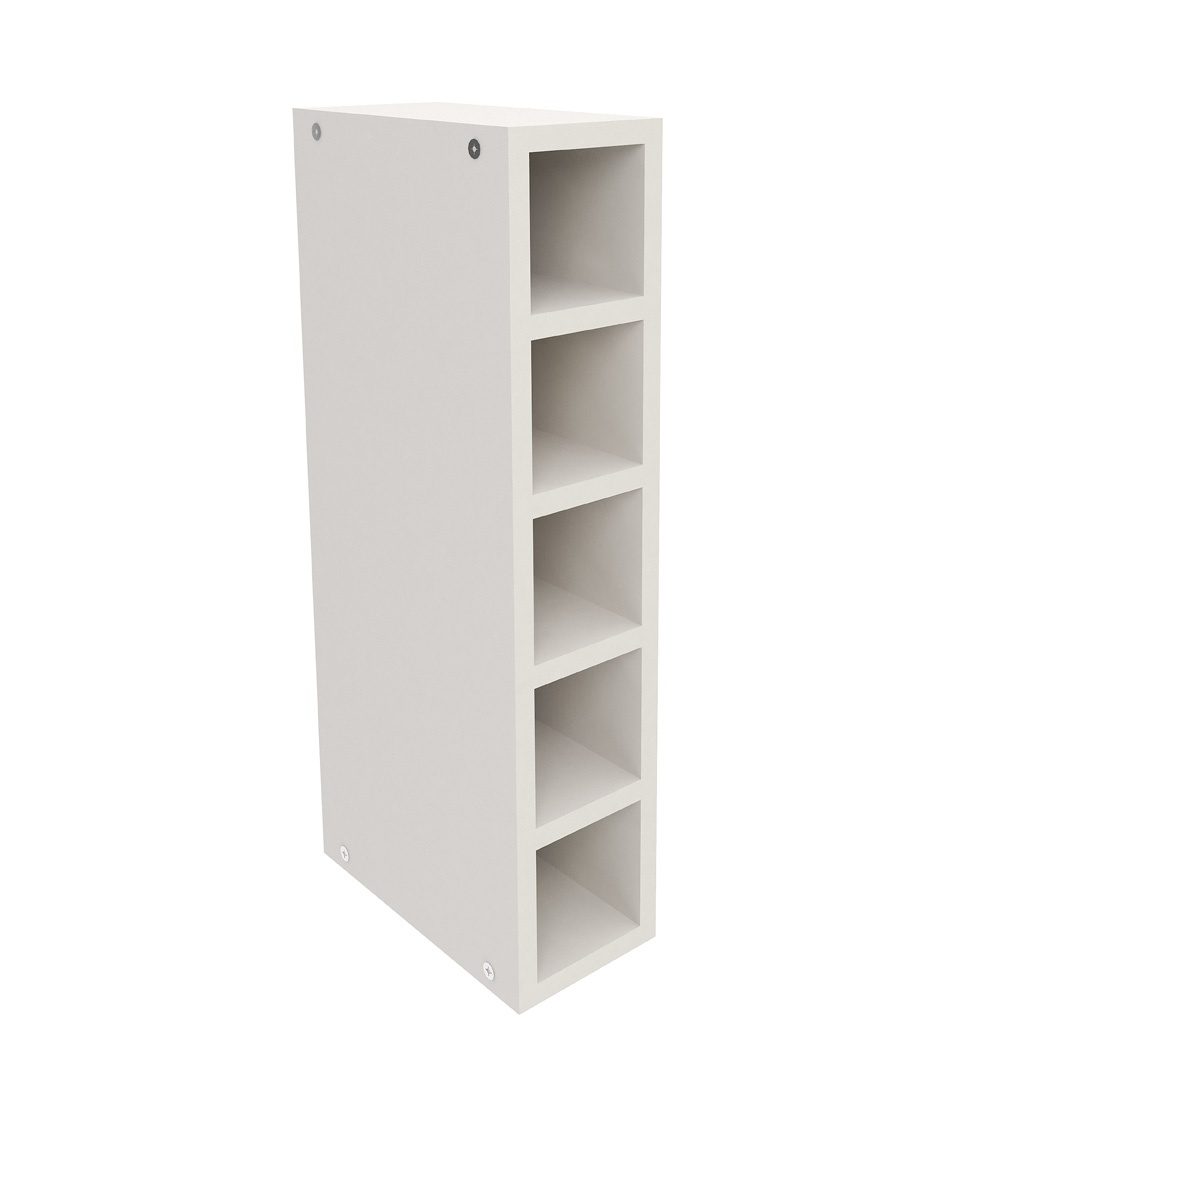 VERTICAL PIGEON HOLE CABINET | VPH - OXFORD WHITE (LQ-21704)